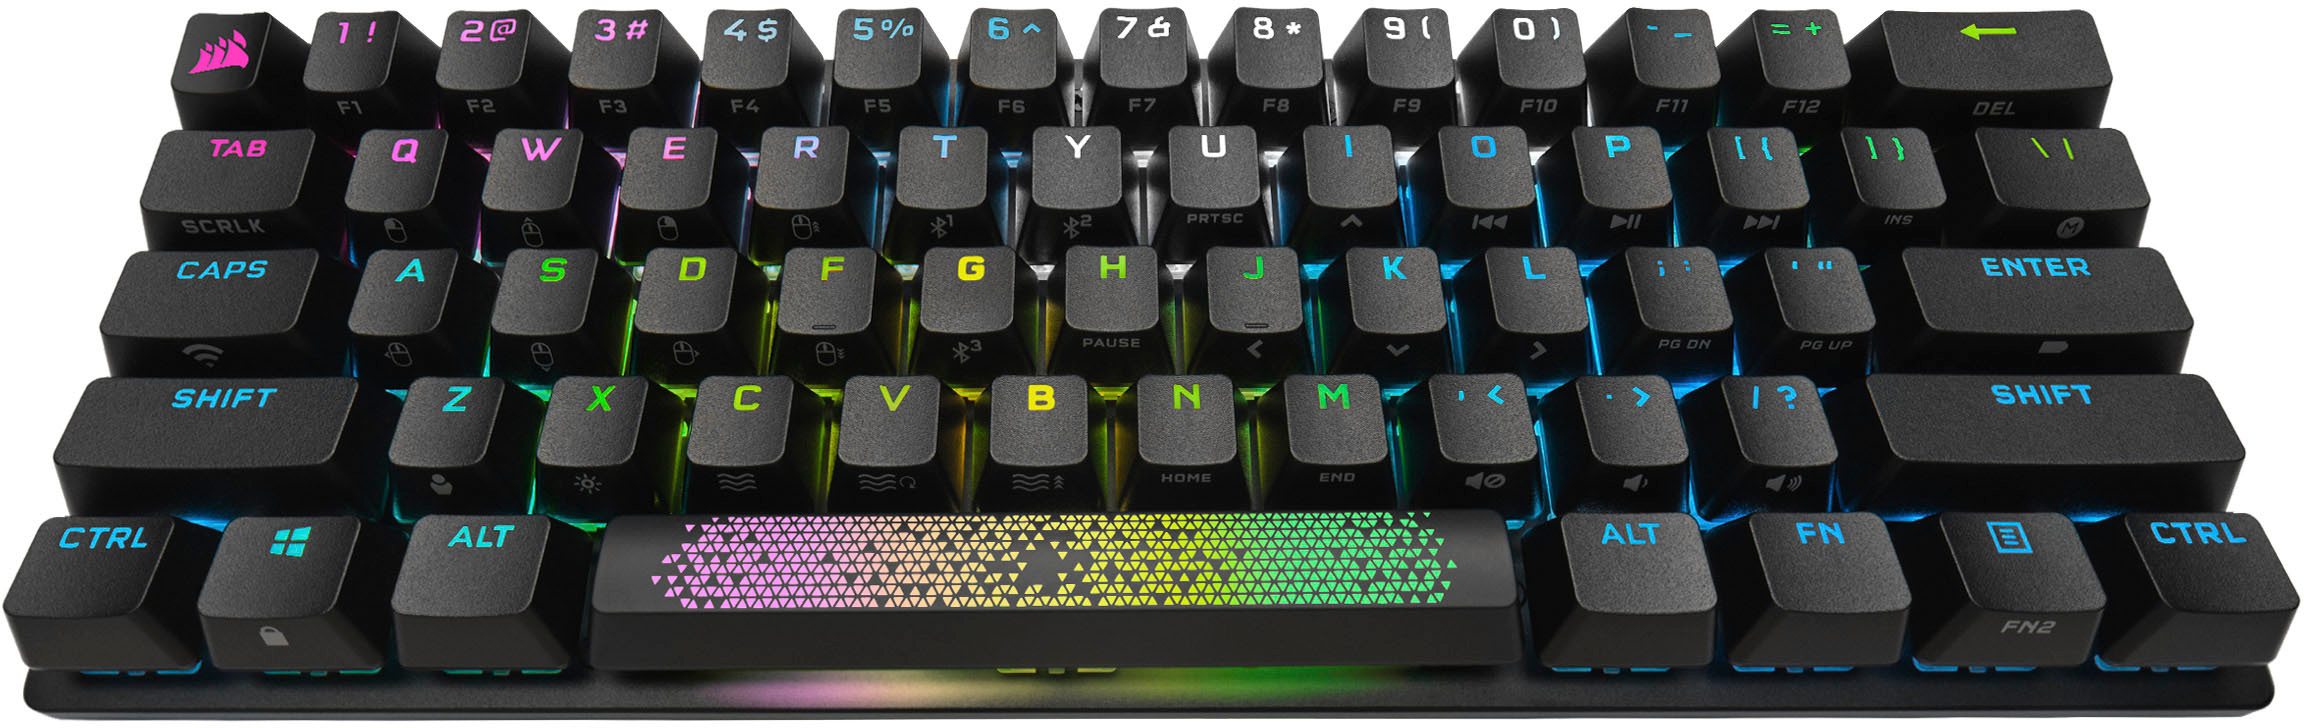 Corsair K70 Pro Mini Wireless RGB 60% Mechanical Gaming Keyboard (Fastest Sub-1ms Wireless, Swappable Cherry MX Speed Keyswitches, Durable Aluminum